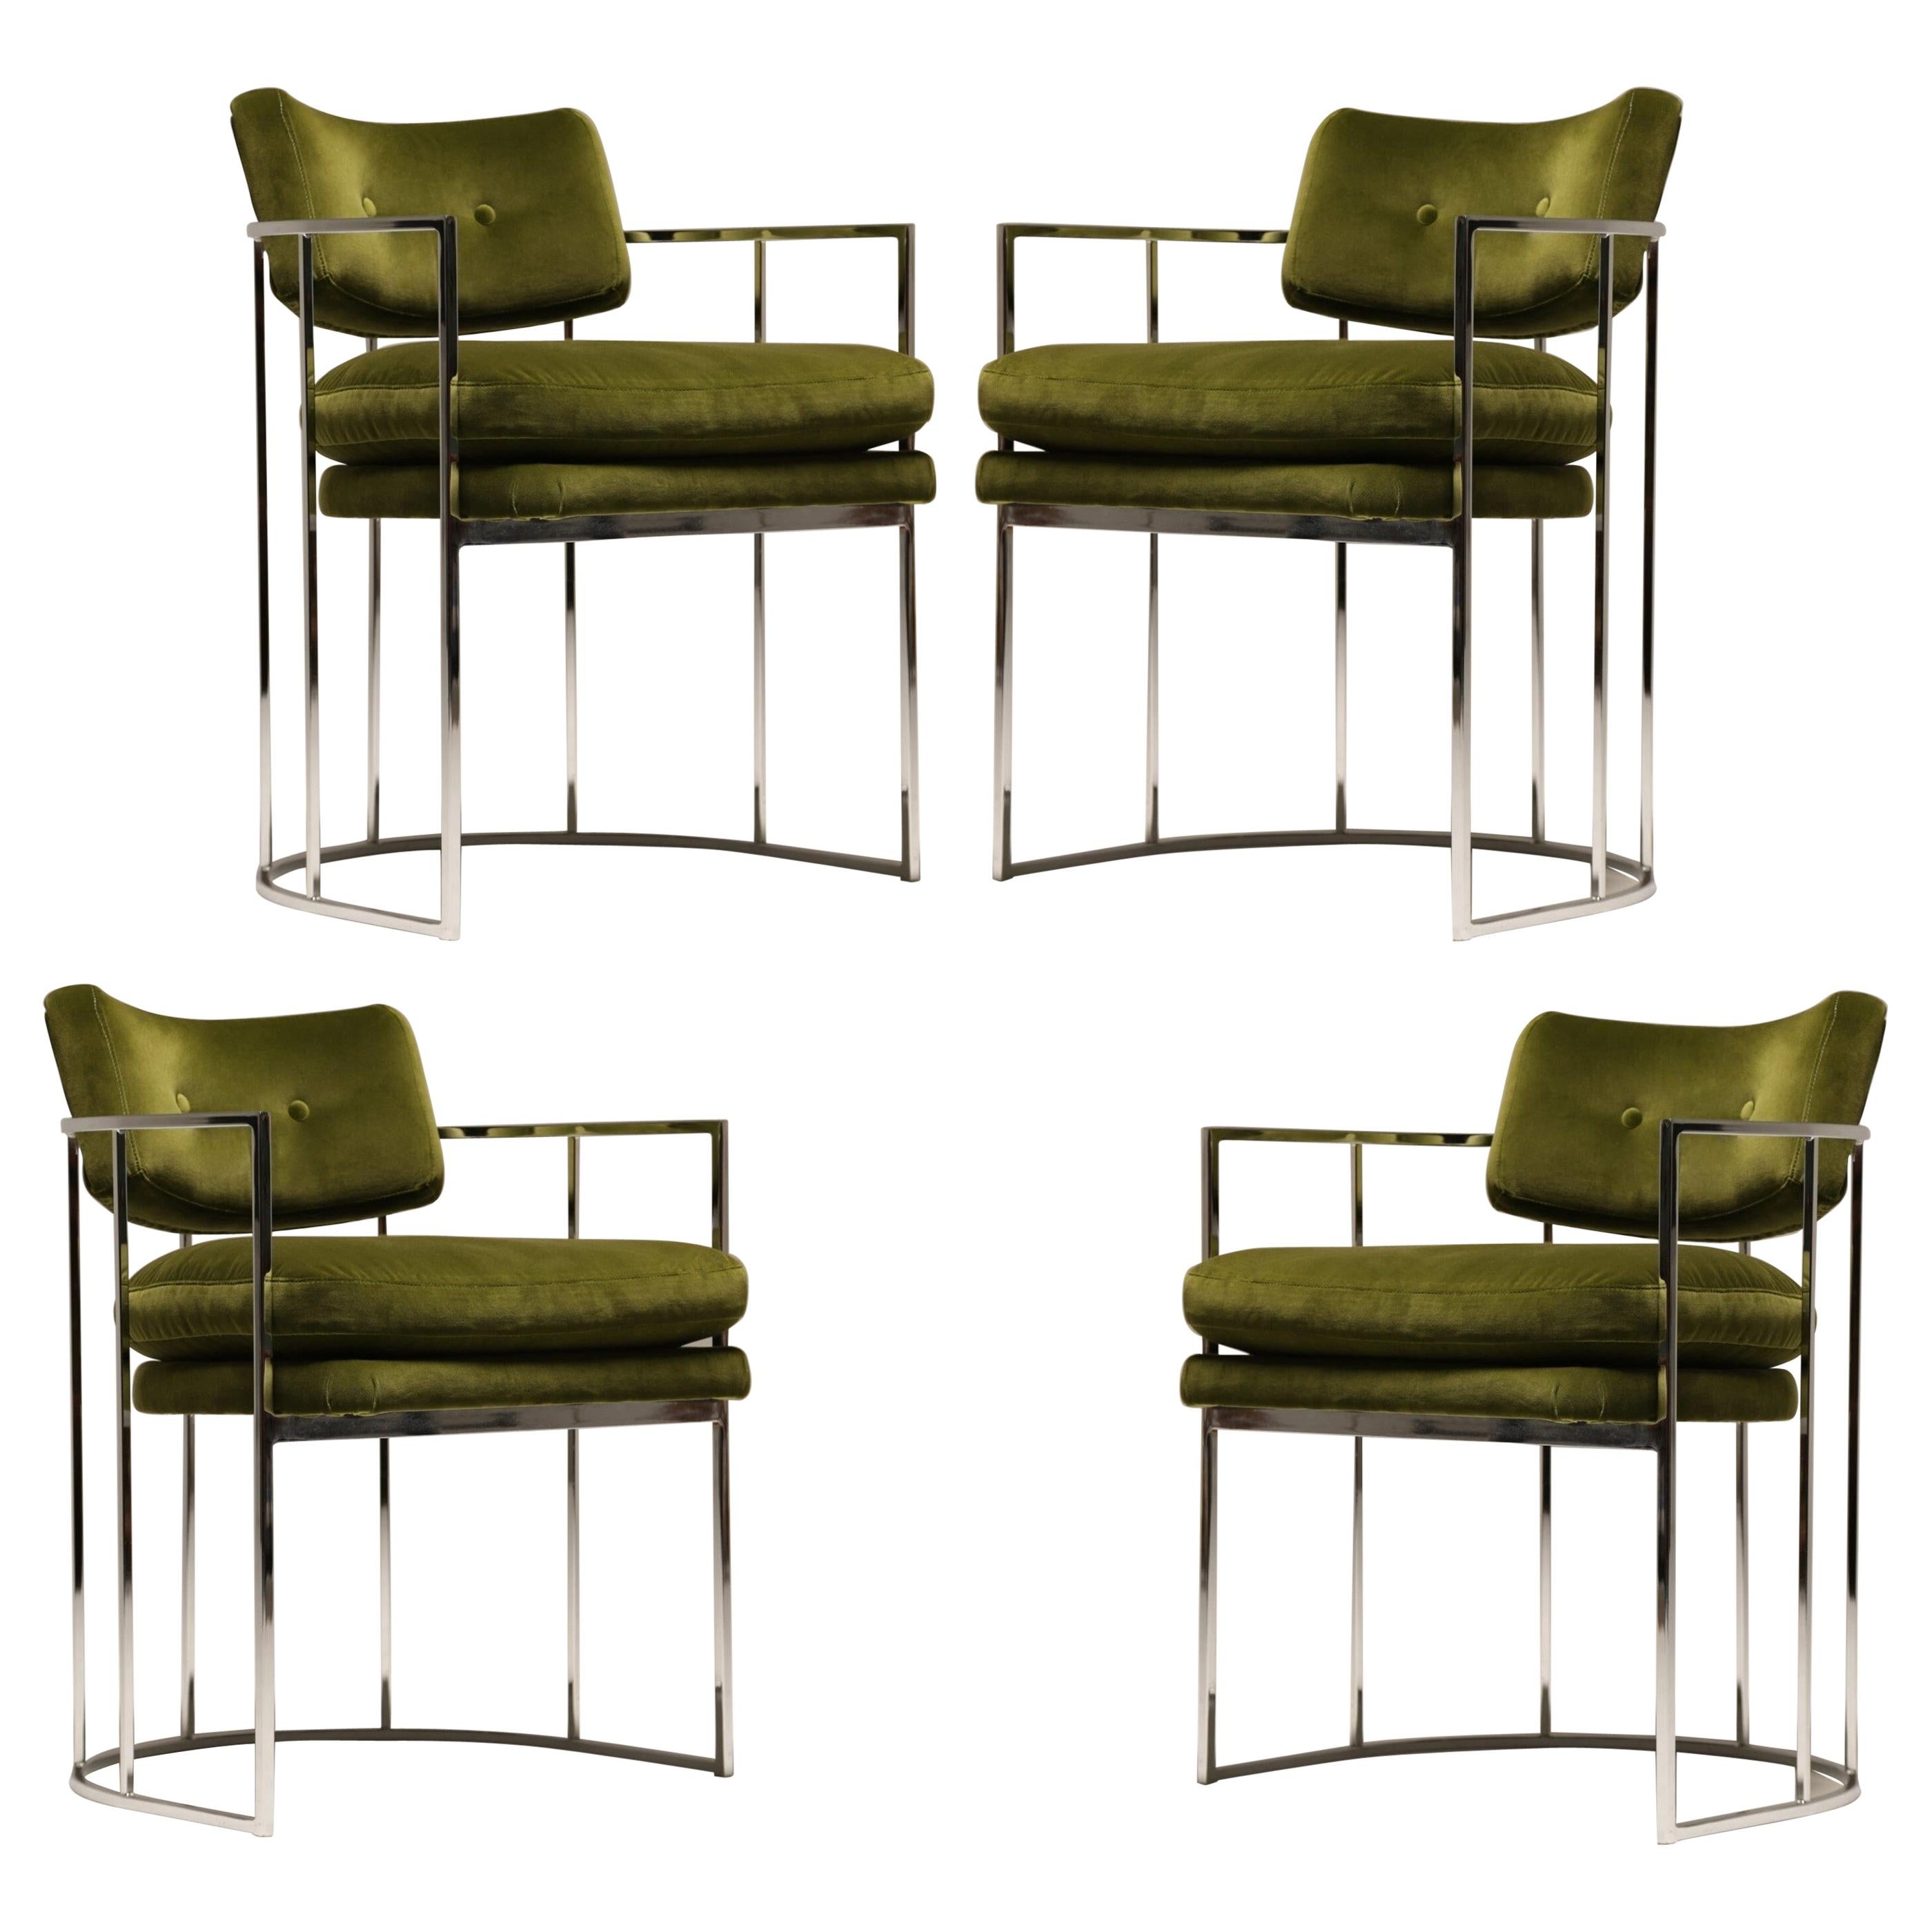 Four Green and Chrome Milo Baughman Barrel Dining Chairs